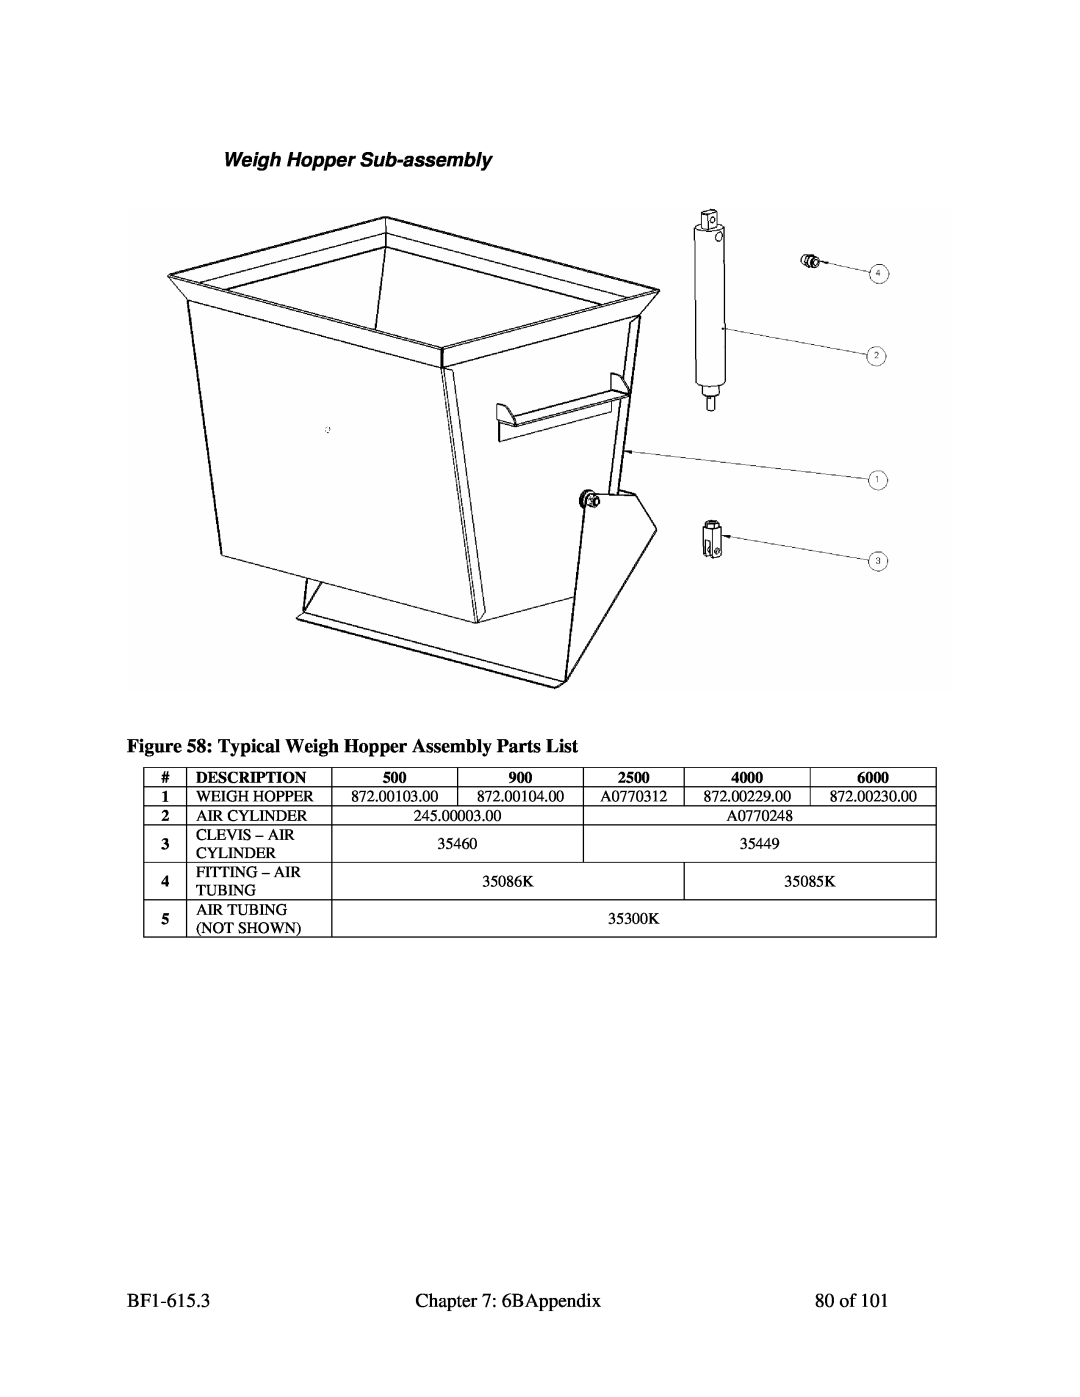 Mitsubishi Electronics 882.00273.00 specifications Weigh Hopper Sub-assembly, Typical Weigh Hopper Assembly Parts List 